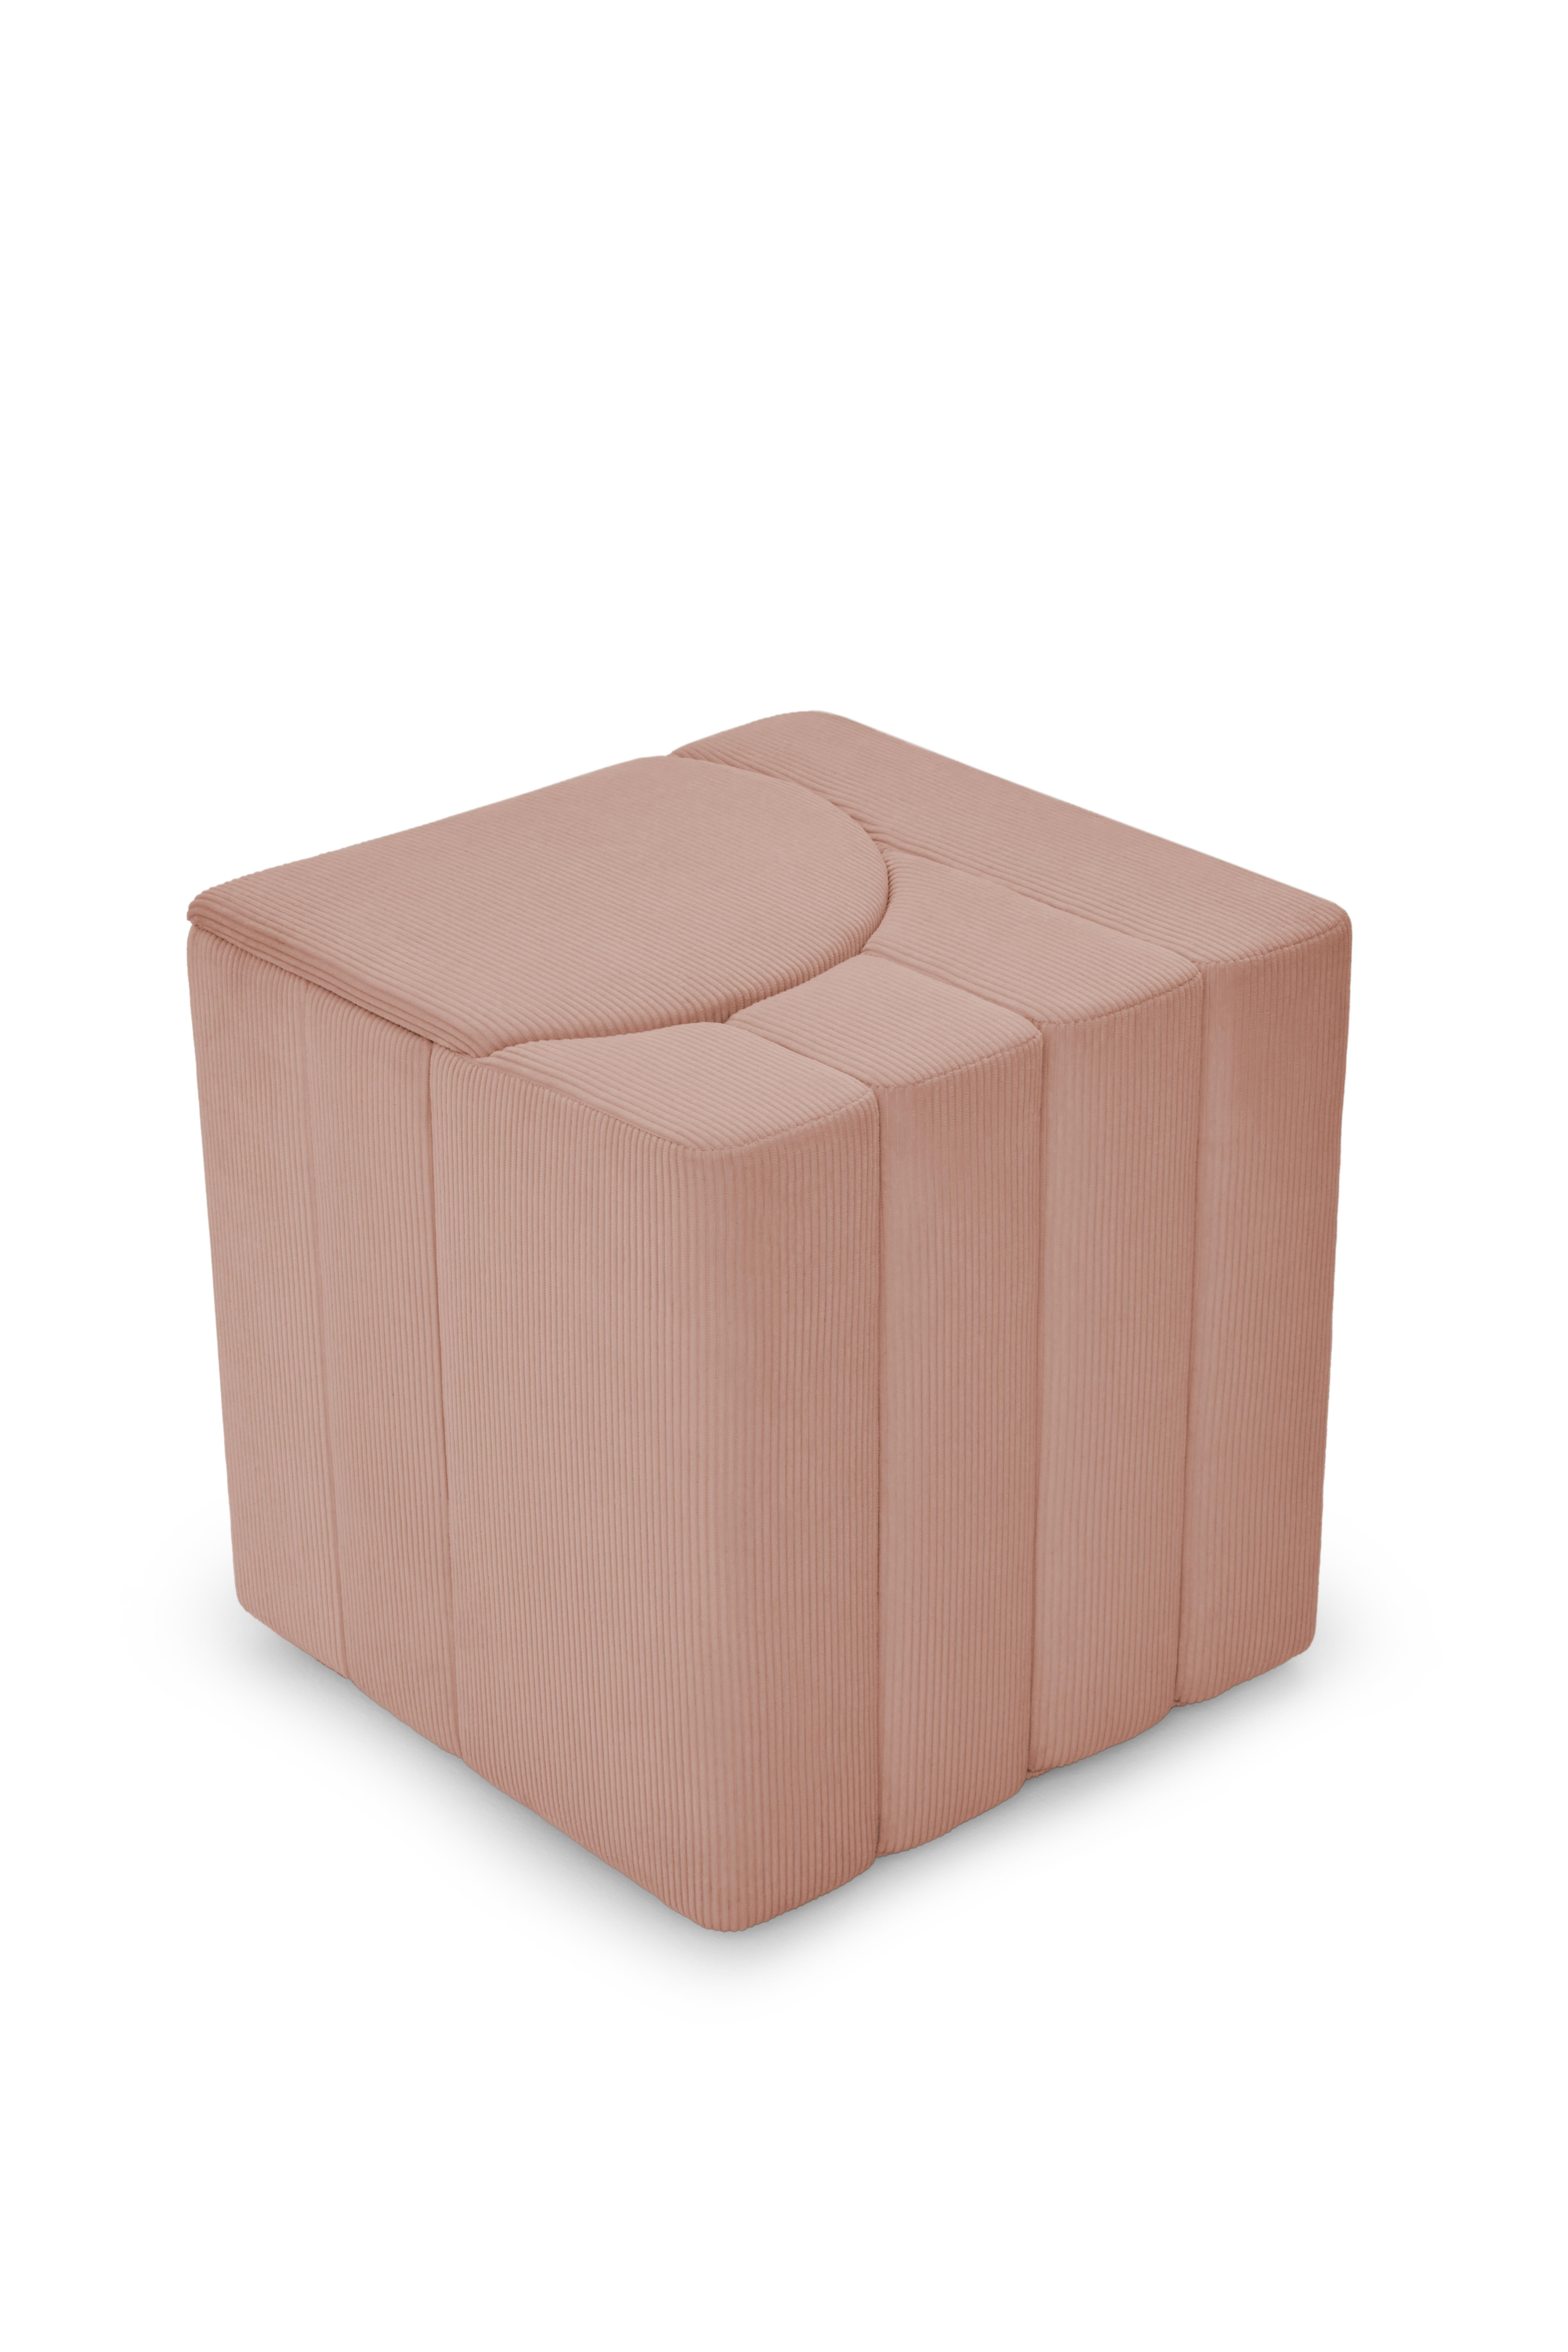 Prologue Stool by Marta Delgado Studio

Geometric stool
Fabric: Corded Velveteen 
Color: Blush (Pink) 

Dimensions:
Width: 18.9” 48 cm 
Depth: 18.9” 48 cm 
Height: 20.1” 51 cm

Marta Delgado is a Portuguese artist, she founded her design